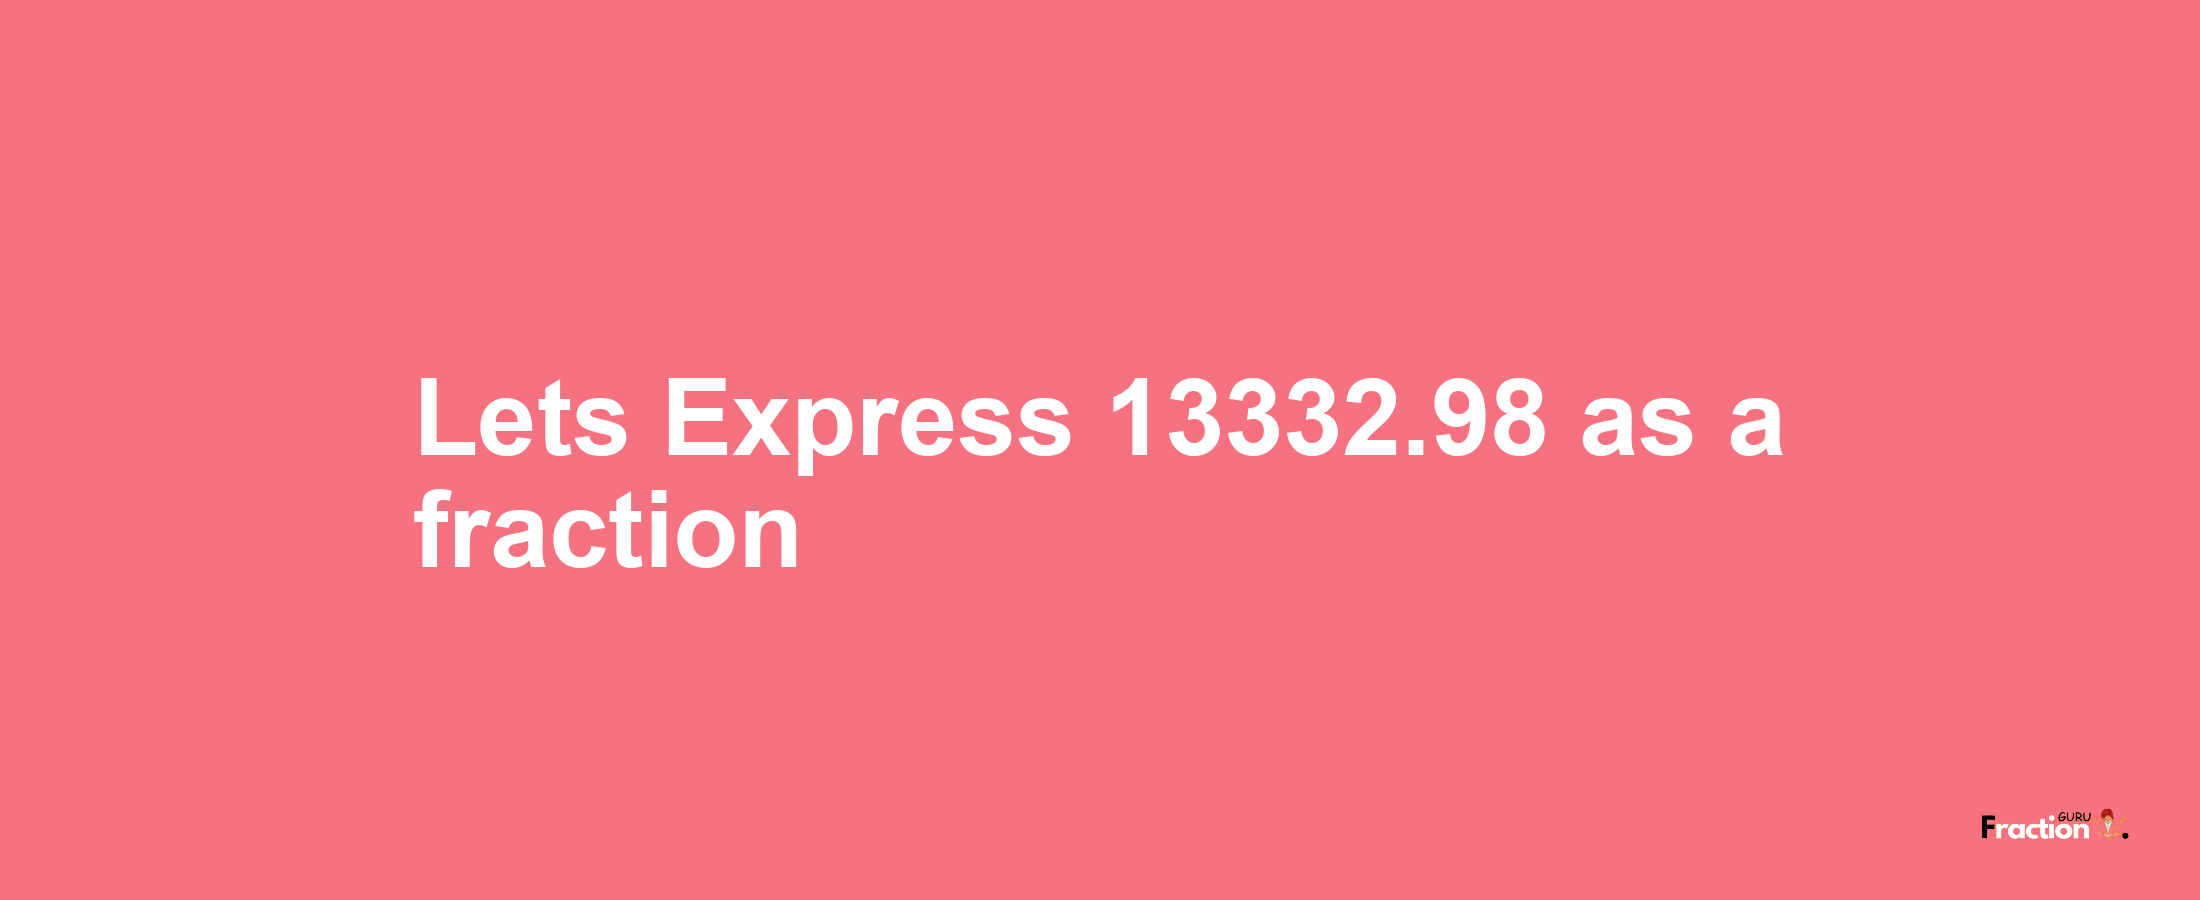 Lets Express 13332.98 as afraction